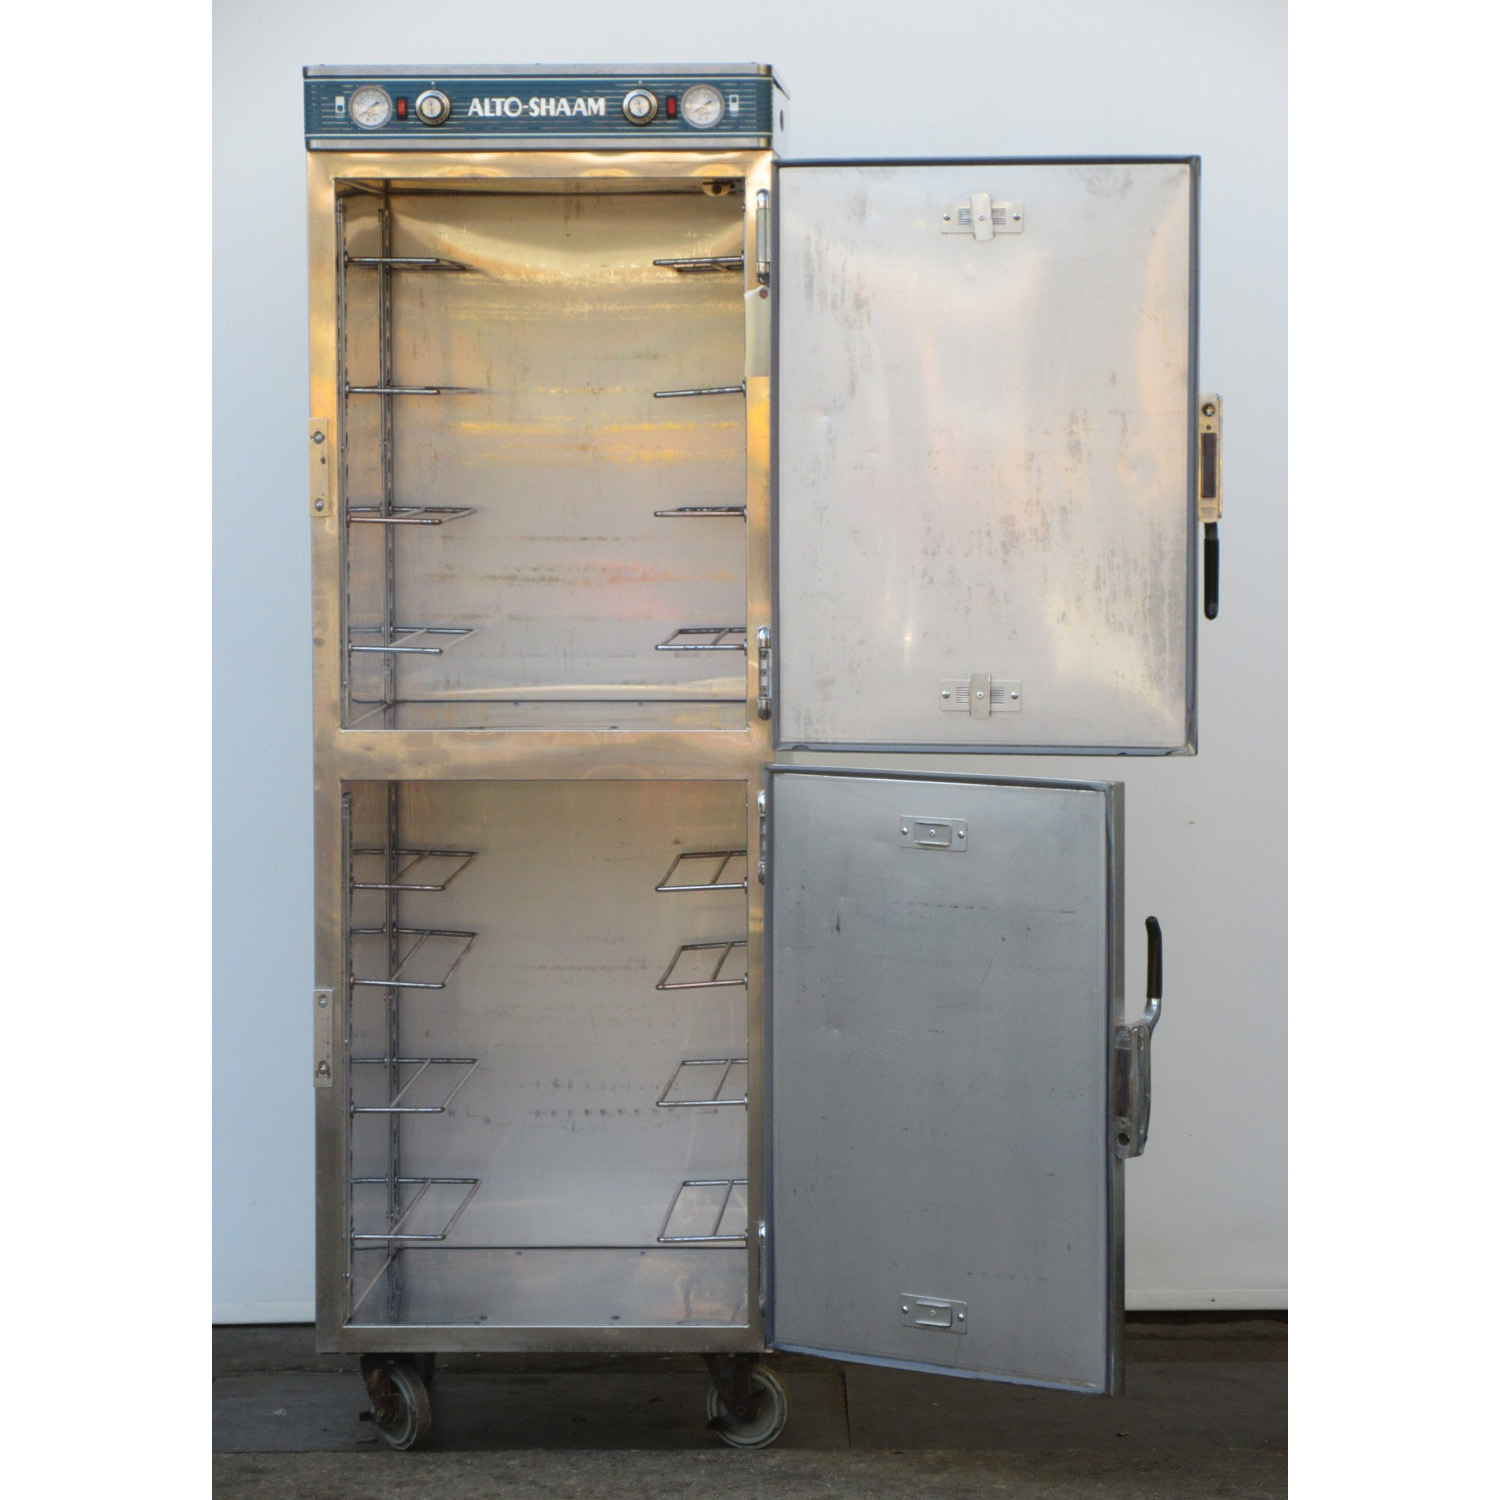 Alto Shaam 1200-UP Hot Food Holding Cabinet, Used Excellent Condition image 1